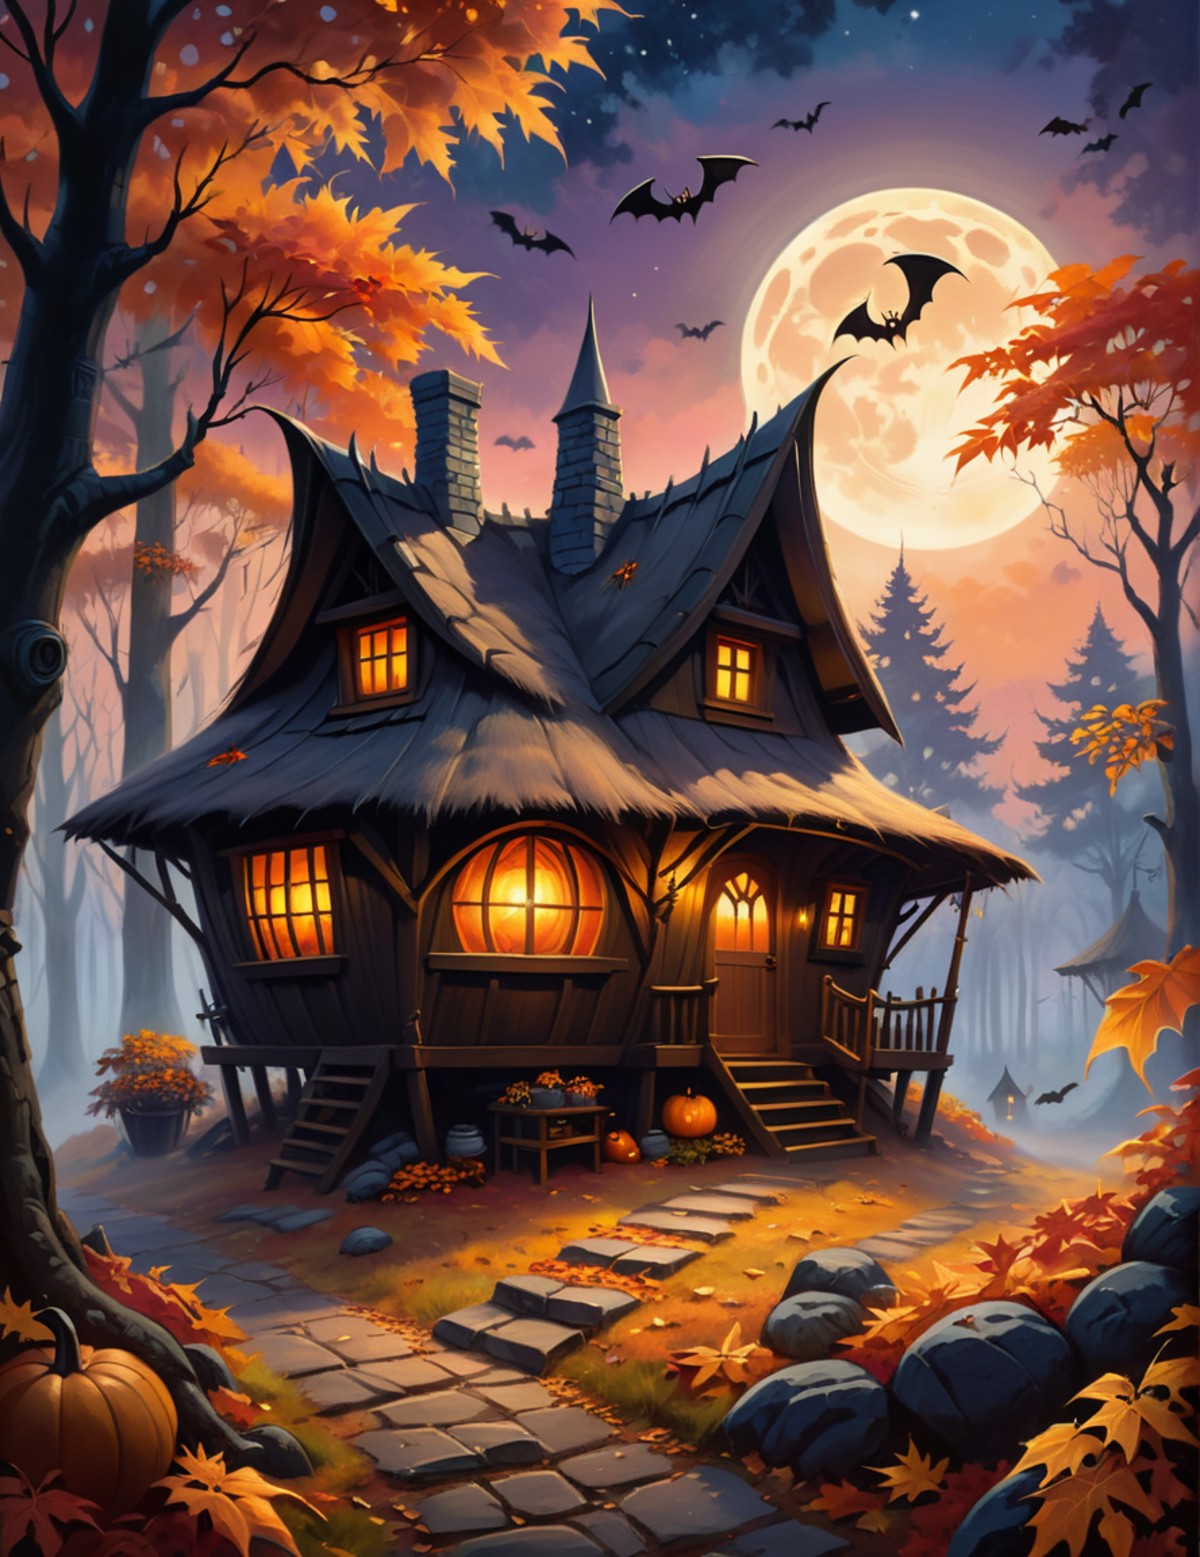 oil painting of a cozy witch's hut, in a fall foliage forest, sunset, low shadows, dusky, spiderwebs, misty, elegant, mast...